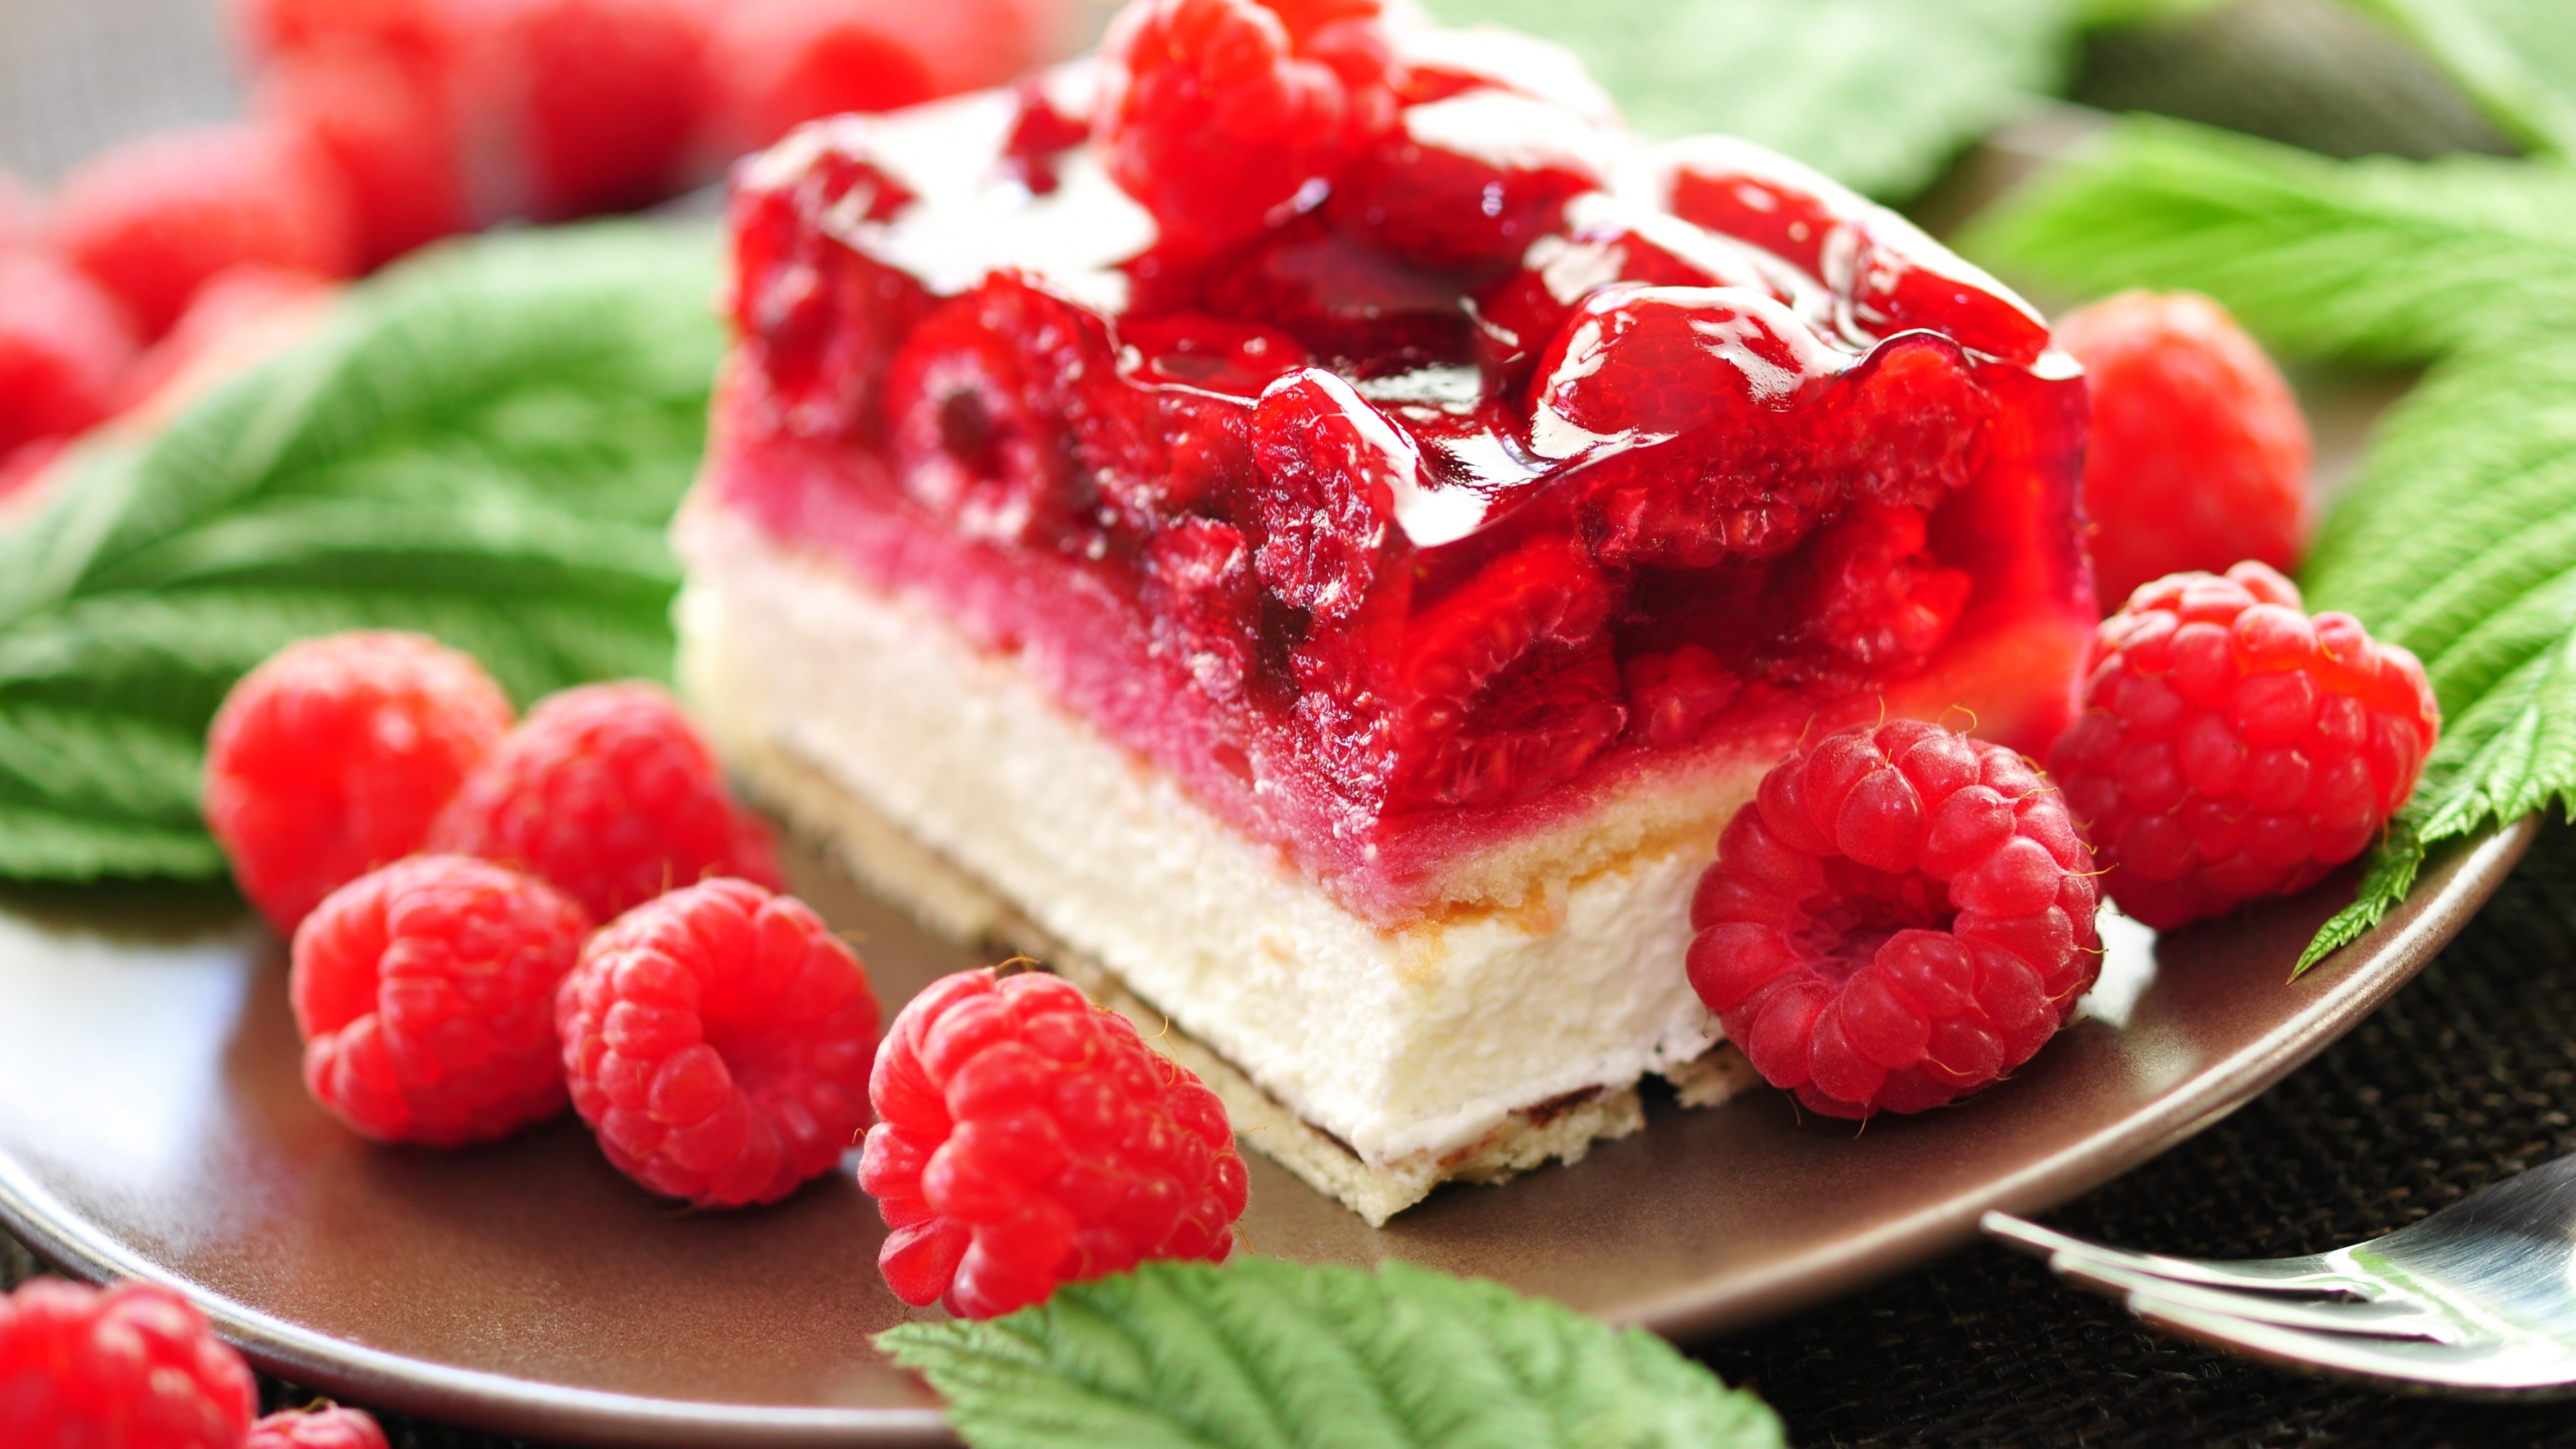 Raspberry mint delight, Cake and jelly goodness, Sweet confection, Tempting treat, 3840x2160 4K Desktop